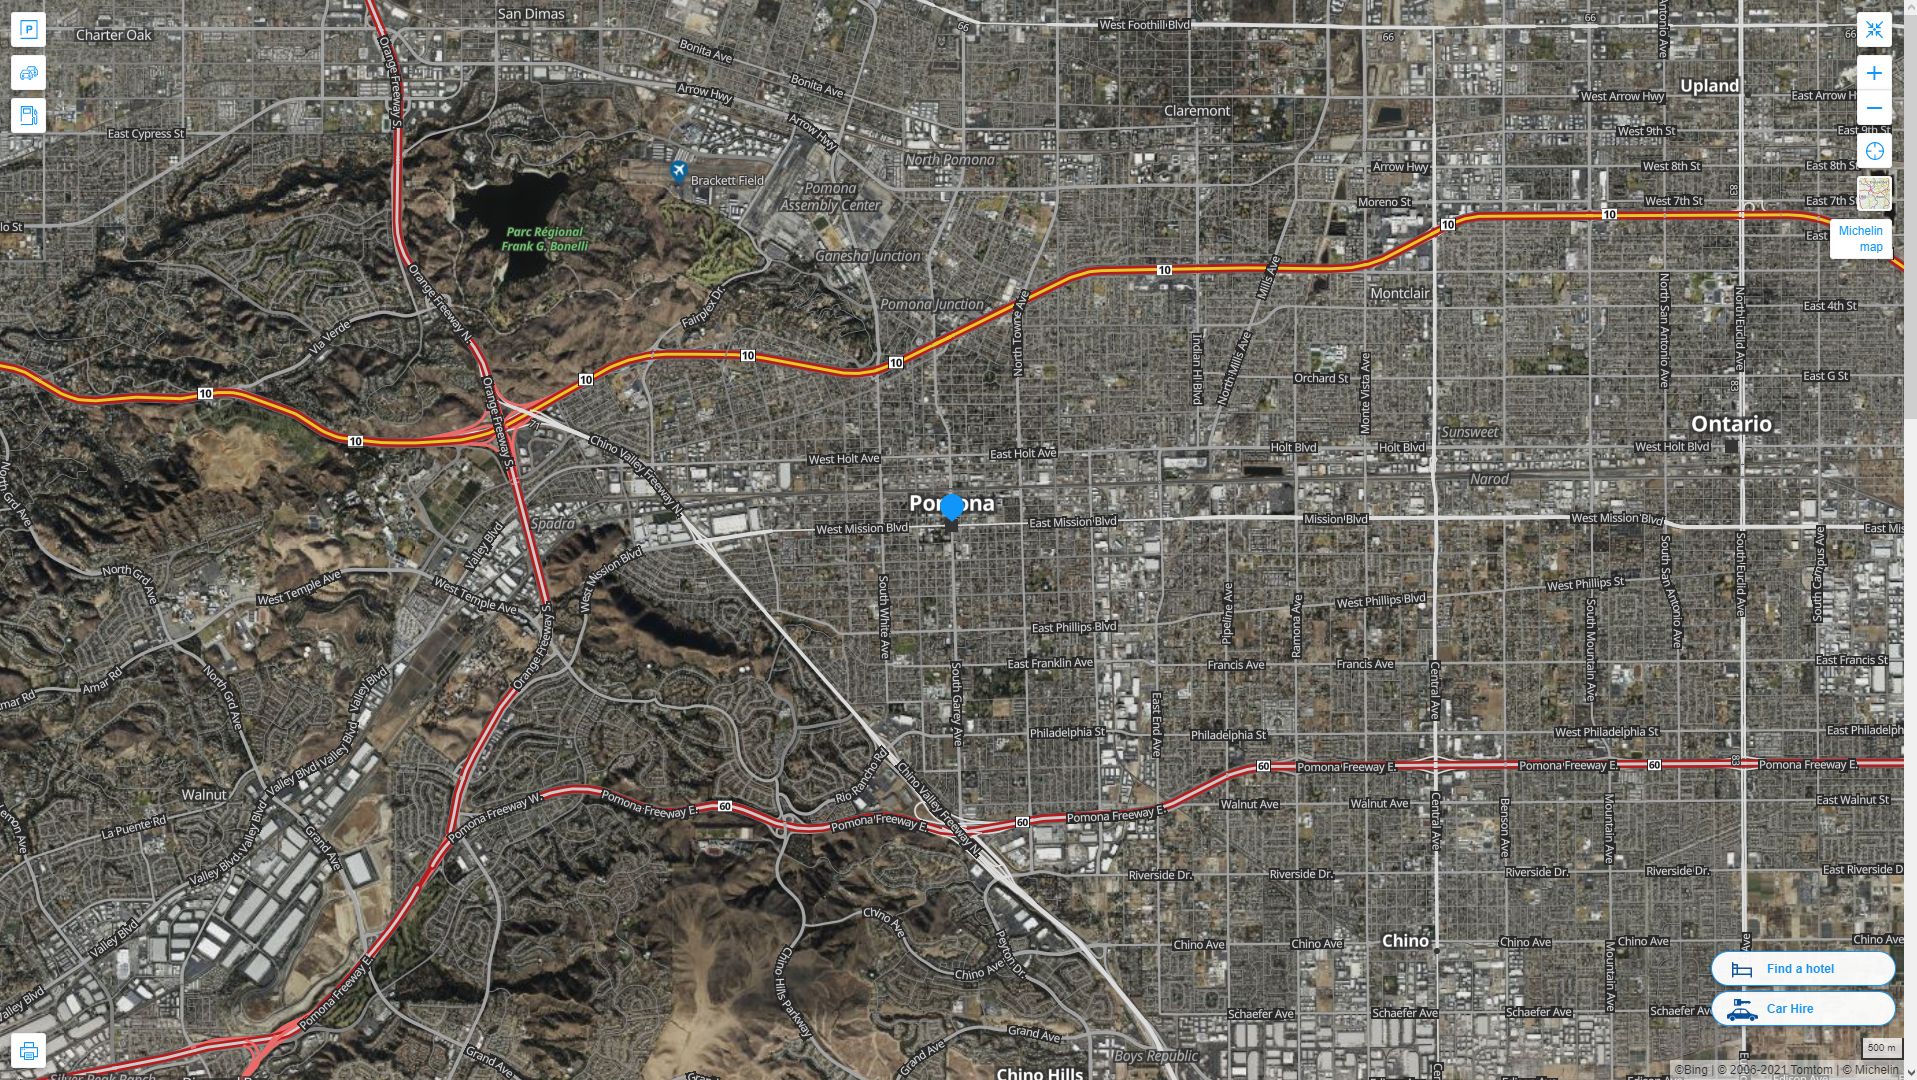 Pomona California Highway and Road Map with Satellite View